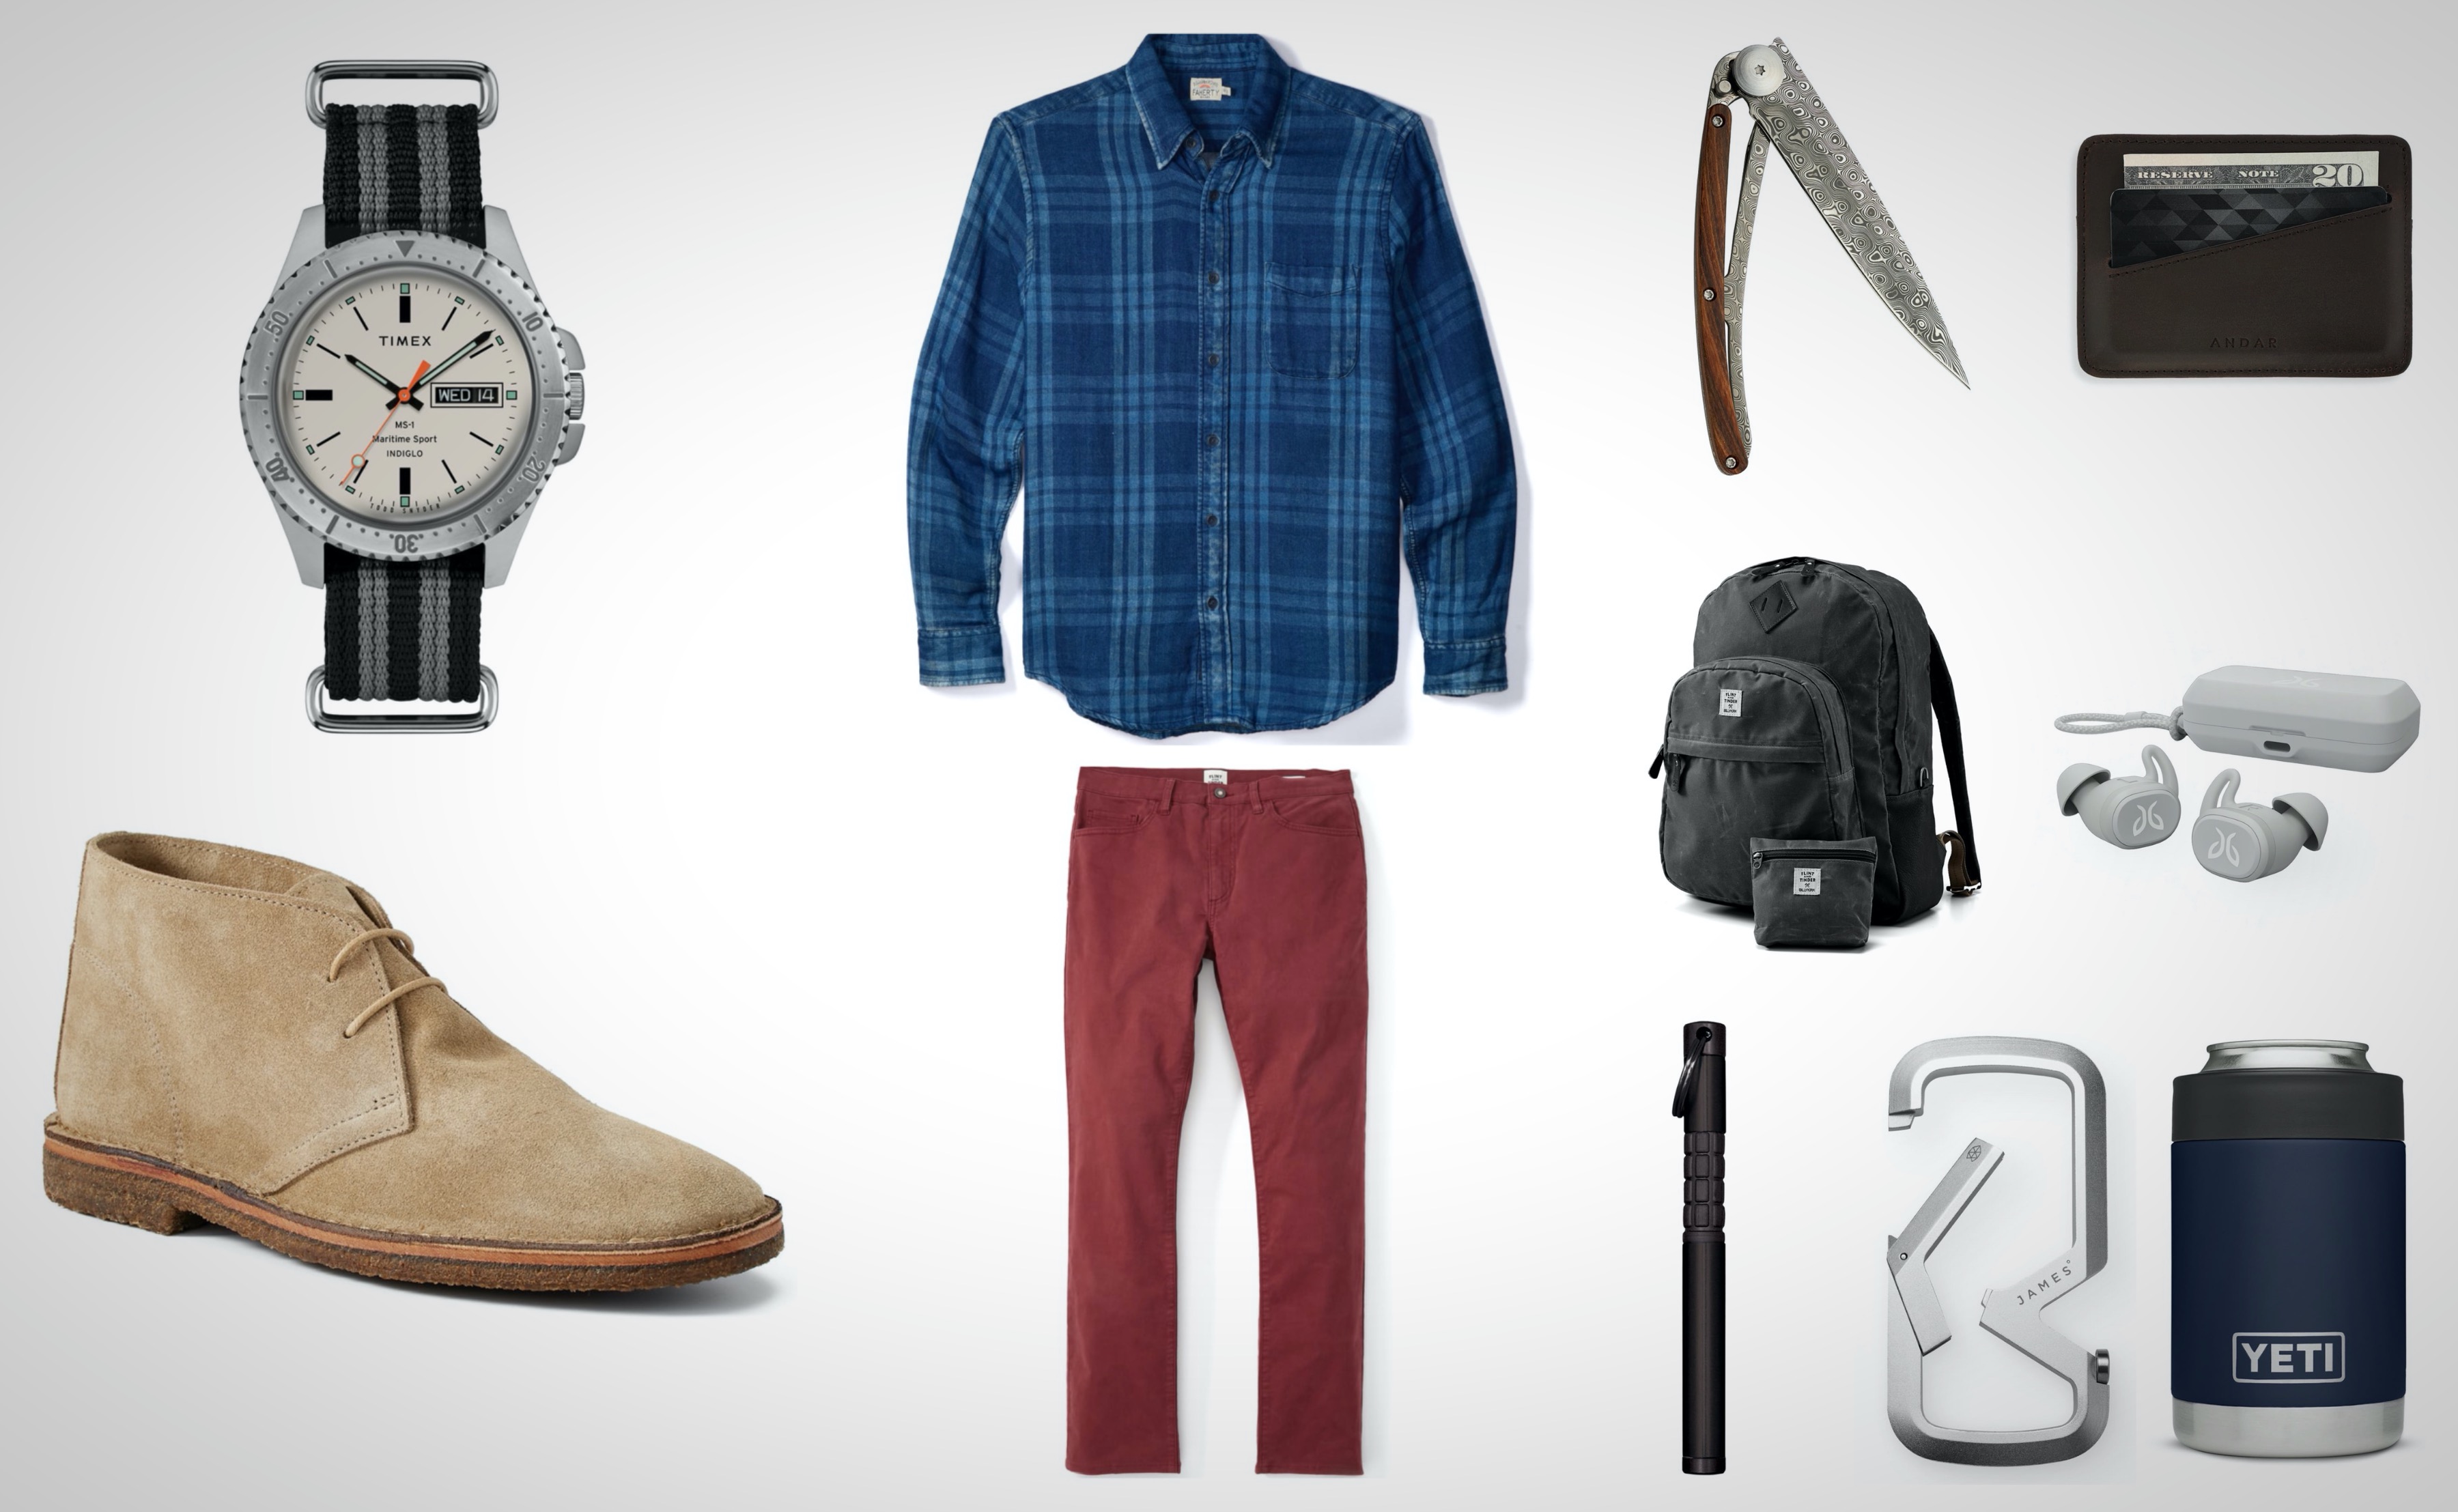 11 Of The Best New Everyday Carry Essentials For Men BroBible